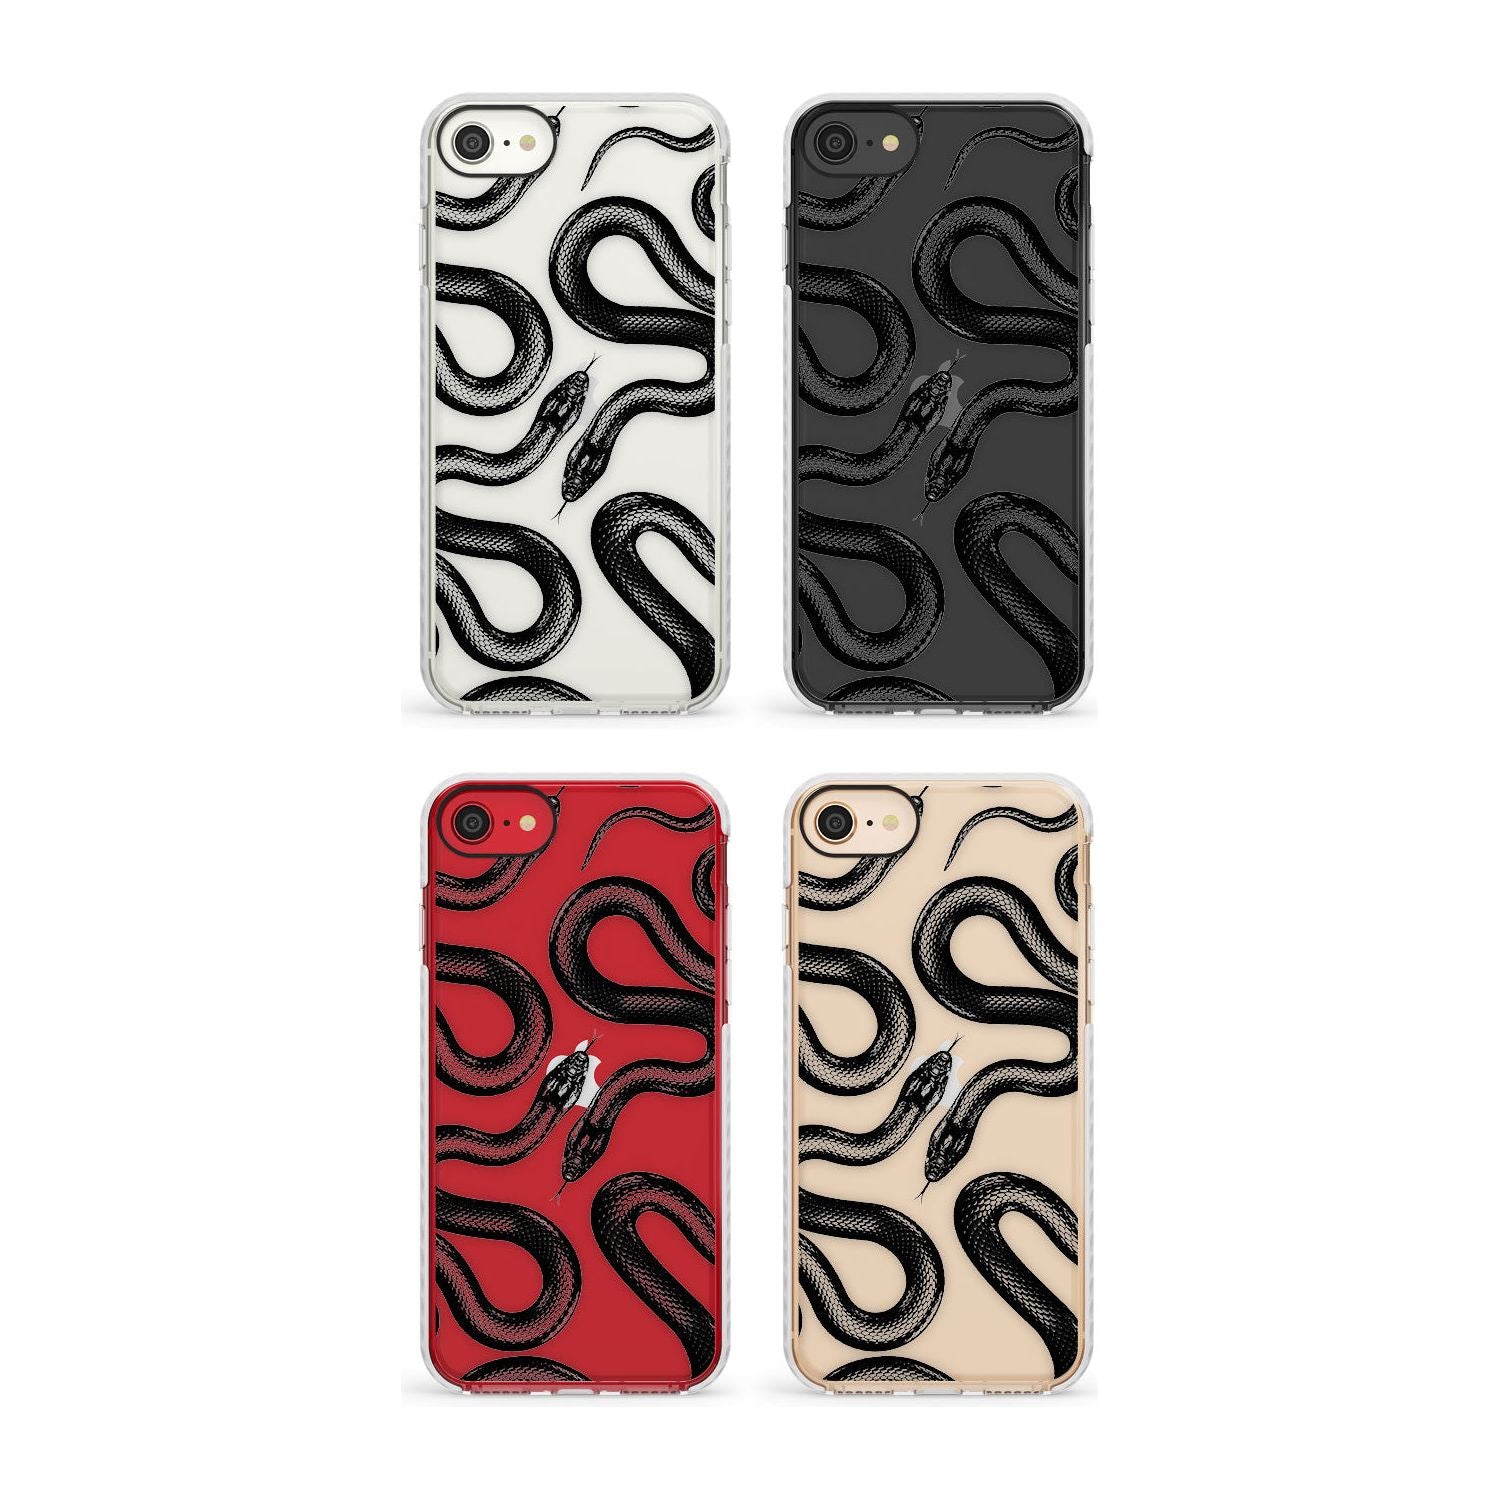 Snakes Phone Case for iPhone SE